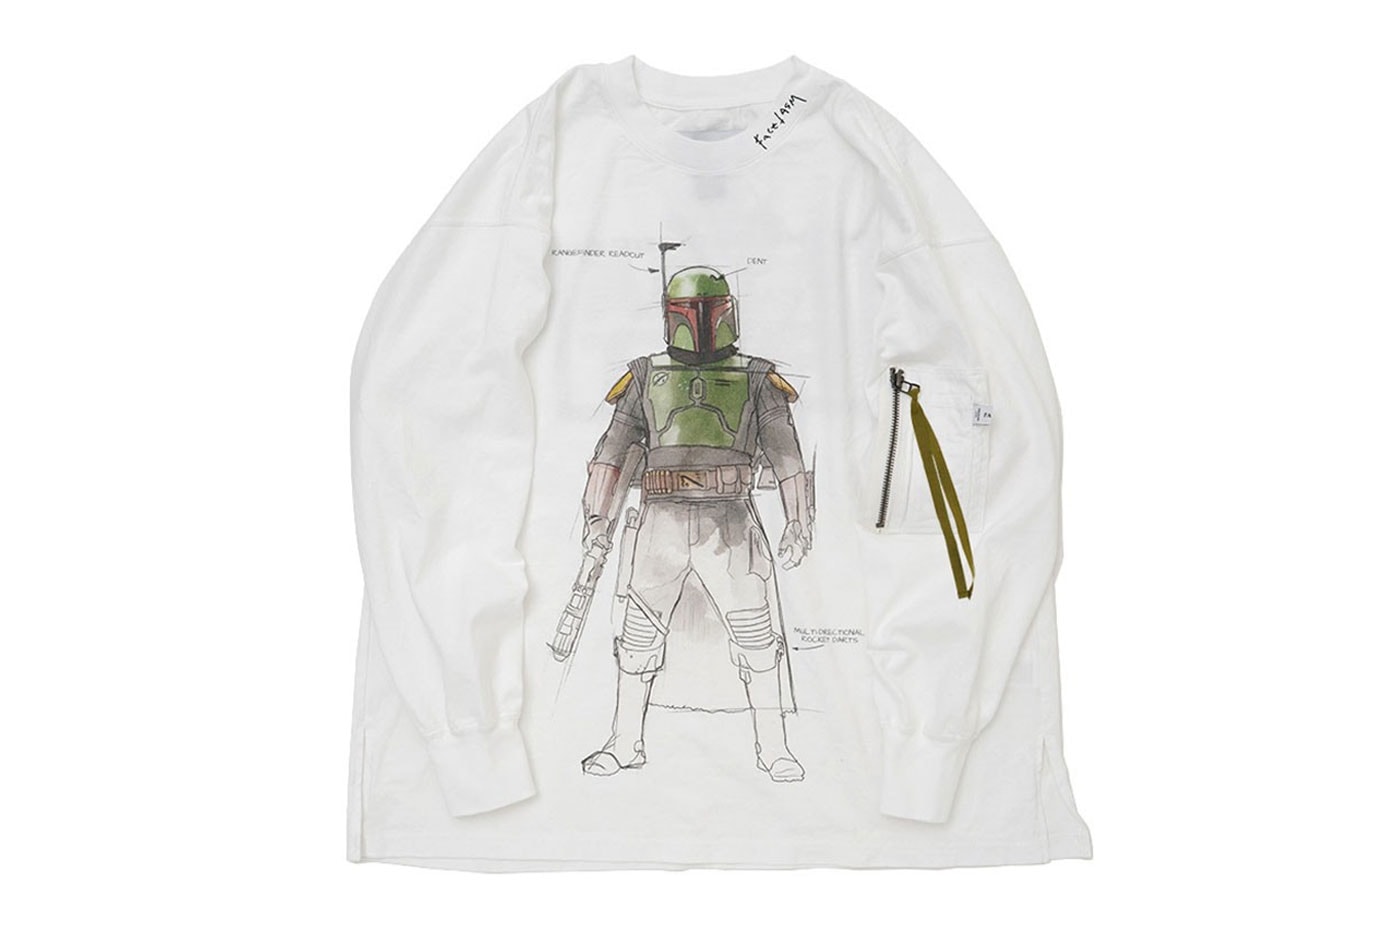 FACETASM and Disney Join Forces To Bring Characters Mickey Mouse and Boba Fett to Life in New Capsule collection hiroshi ochiai star wars the book of boba fett shibuya baby yoda 